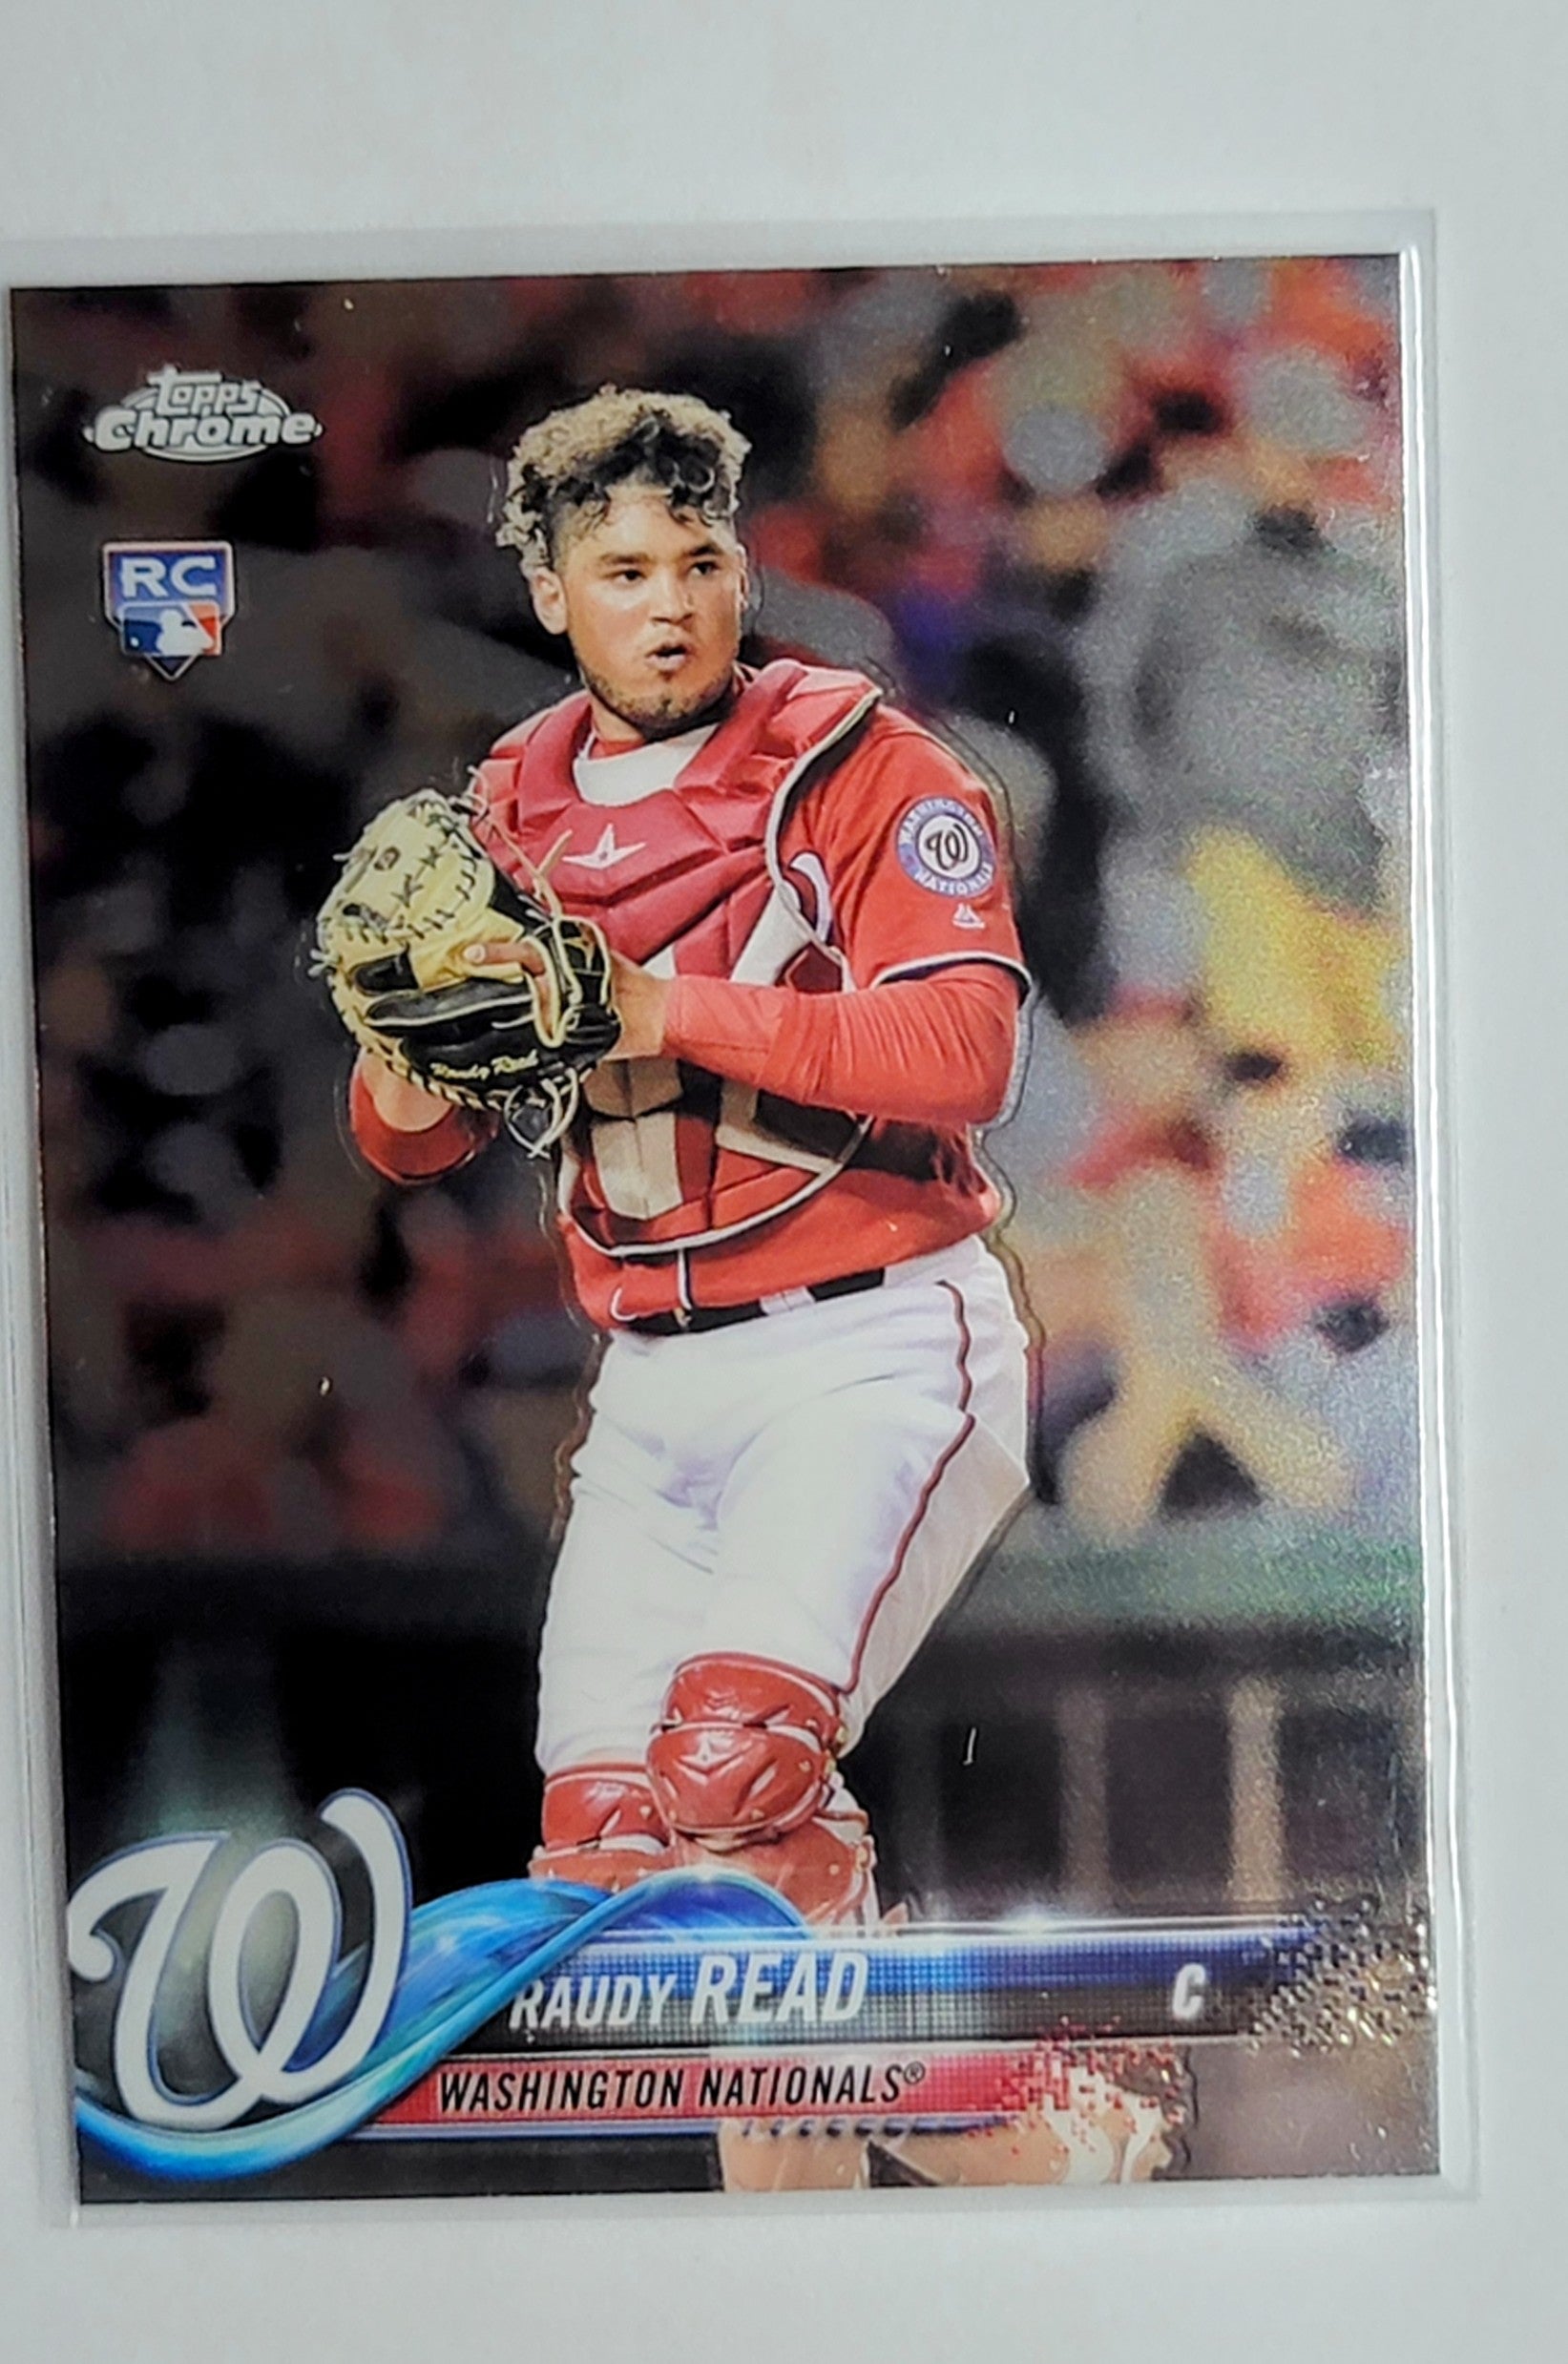 2018 Topps Chrome Raudy Read
  Rookie Autographs  AU Washington
  Nationals Baseball Card  TH1CB simple Xclusive Collectibles   